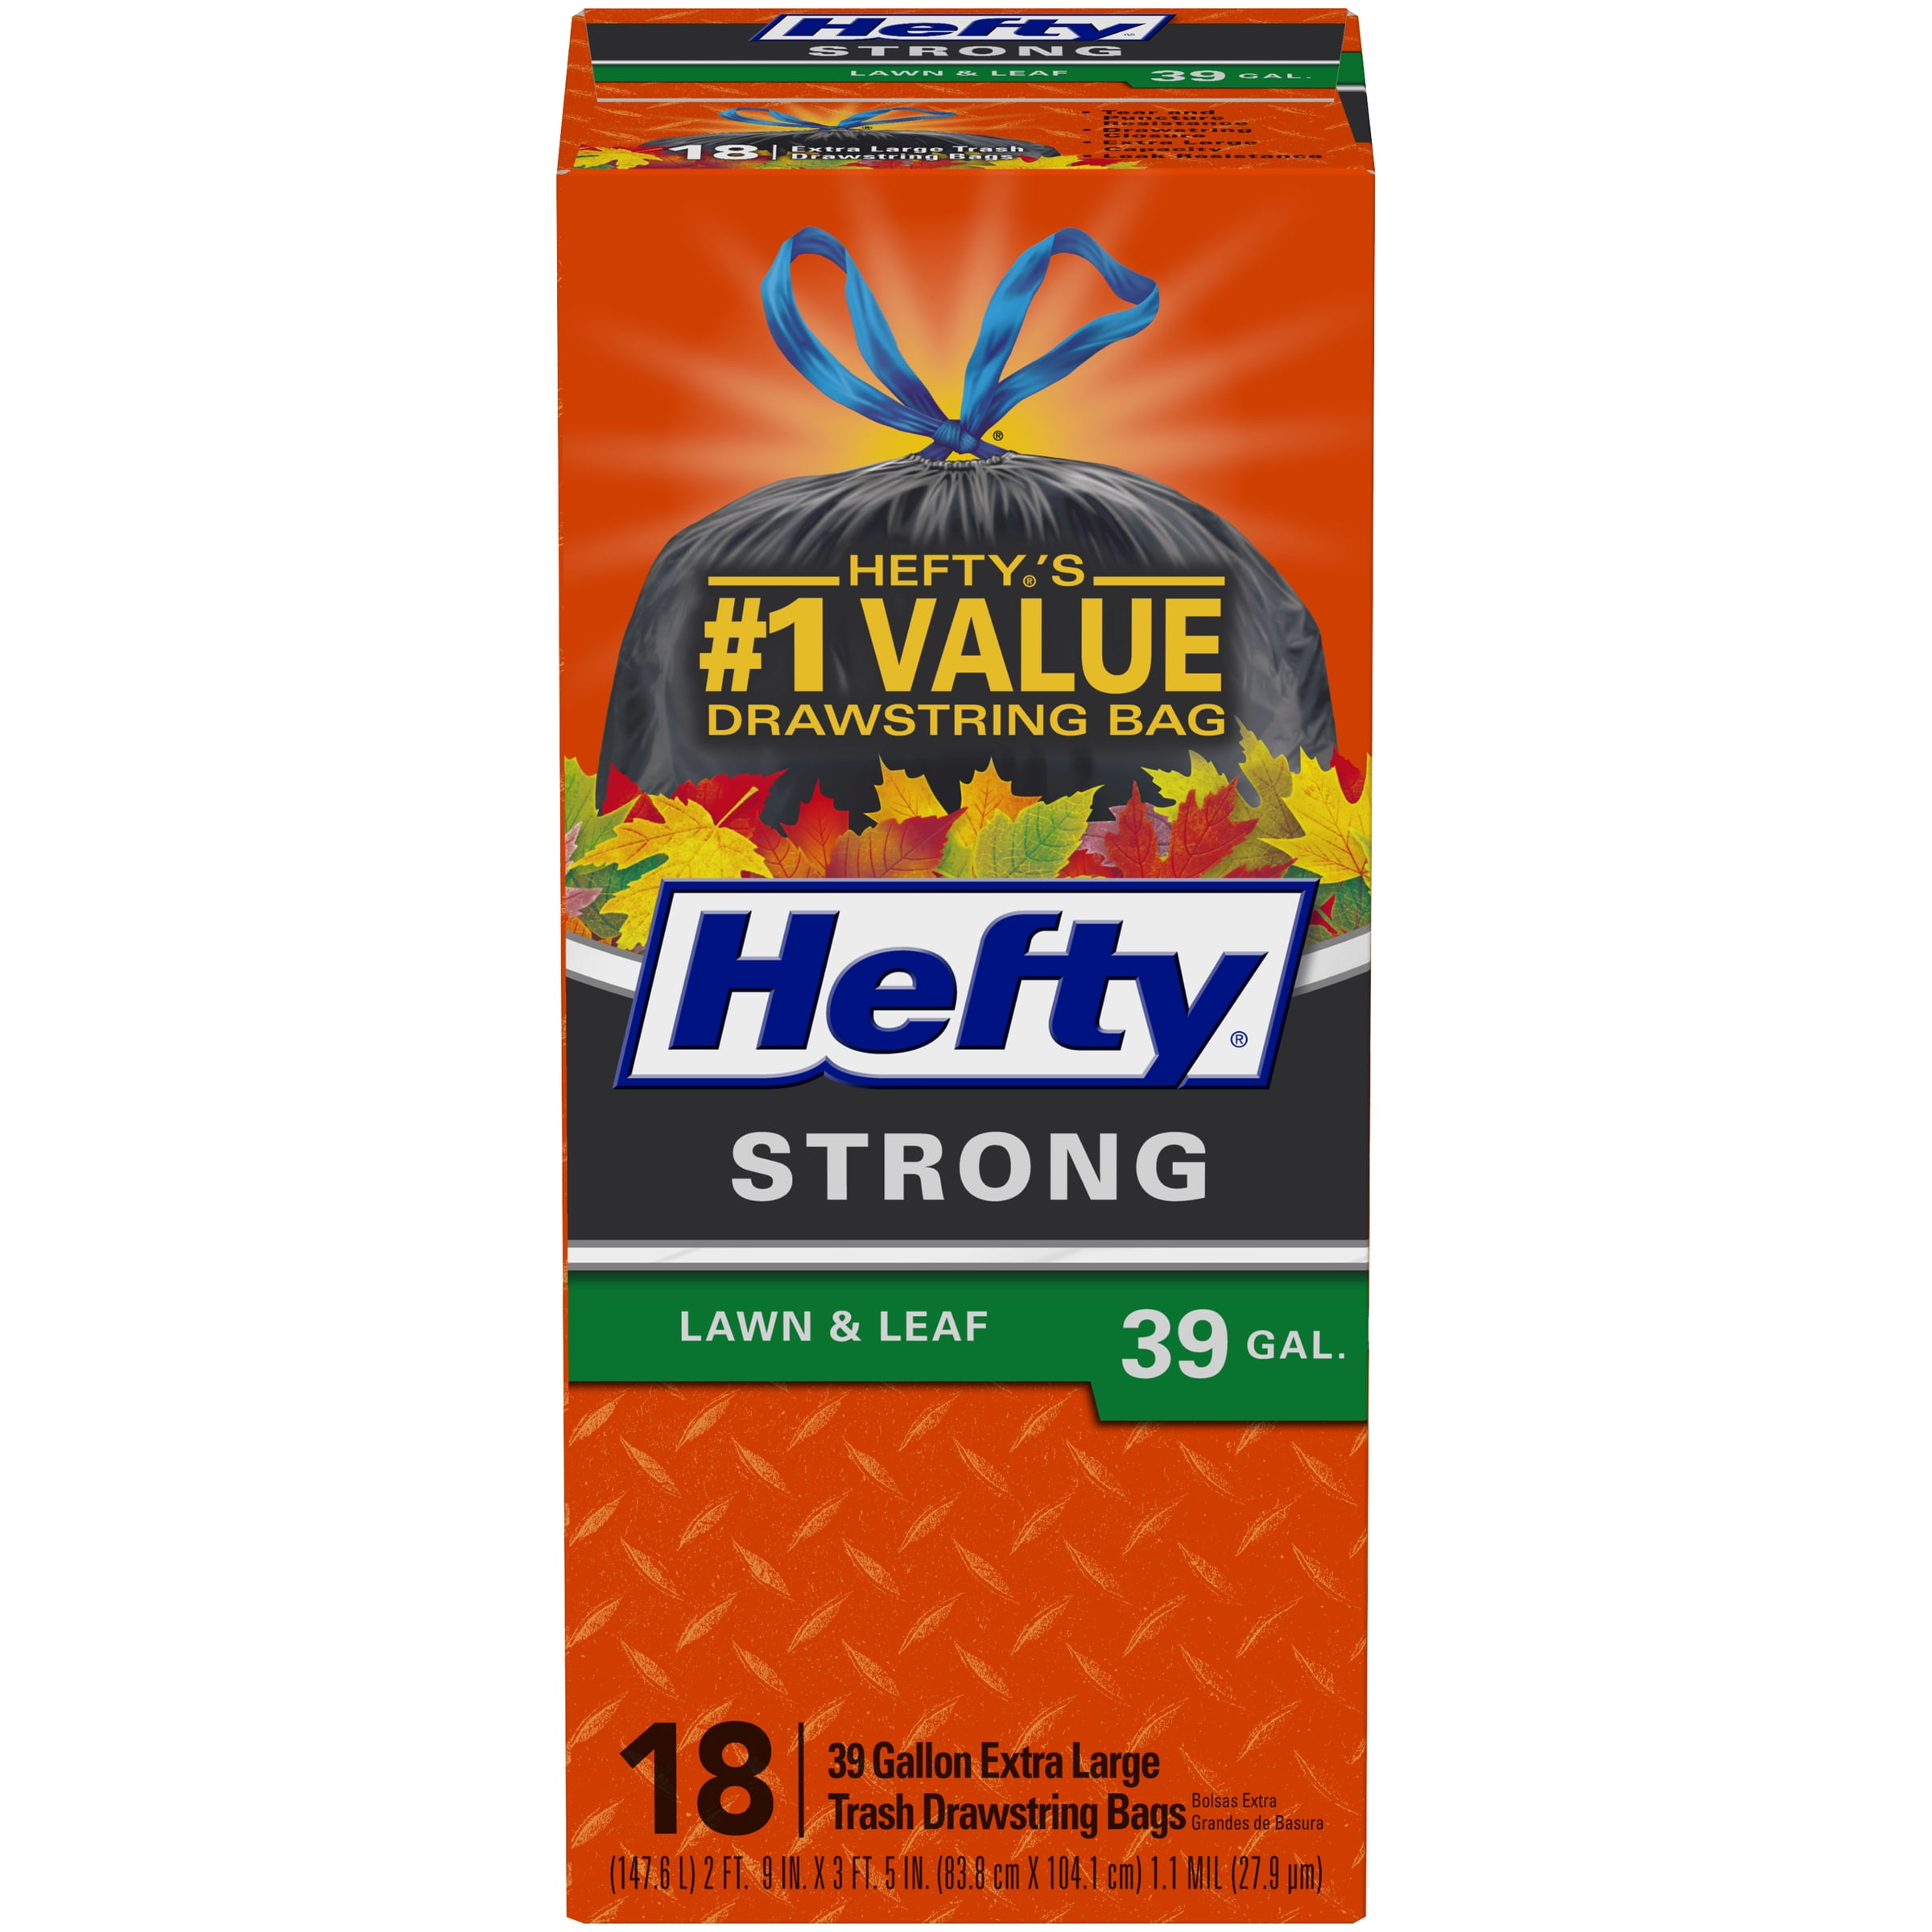 Hefty Strong Lawn & Leaf Drawstring Trash Bags Extra Large 39 Gallon 38 Count 